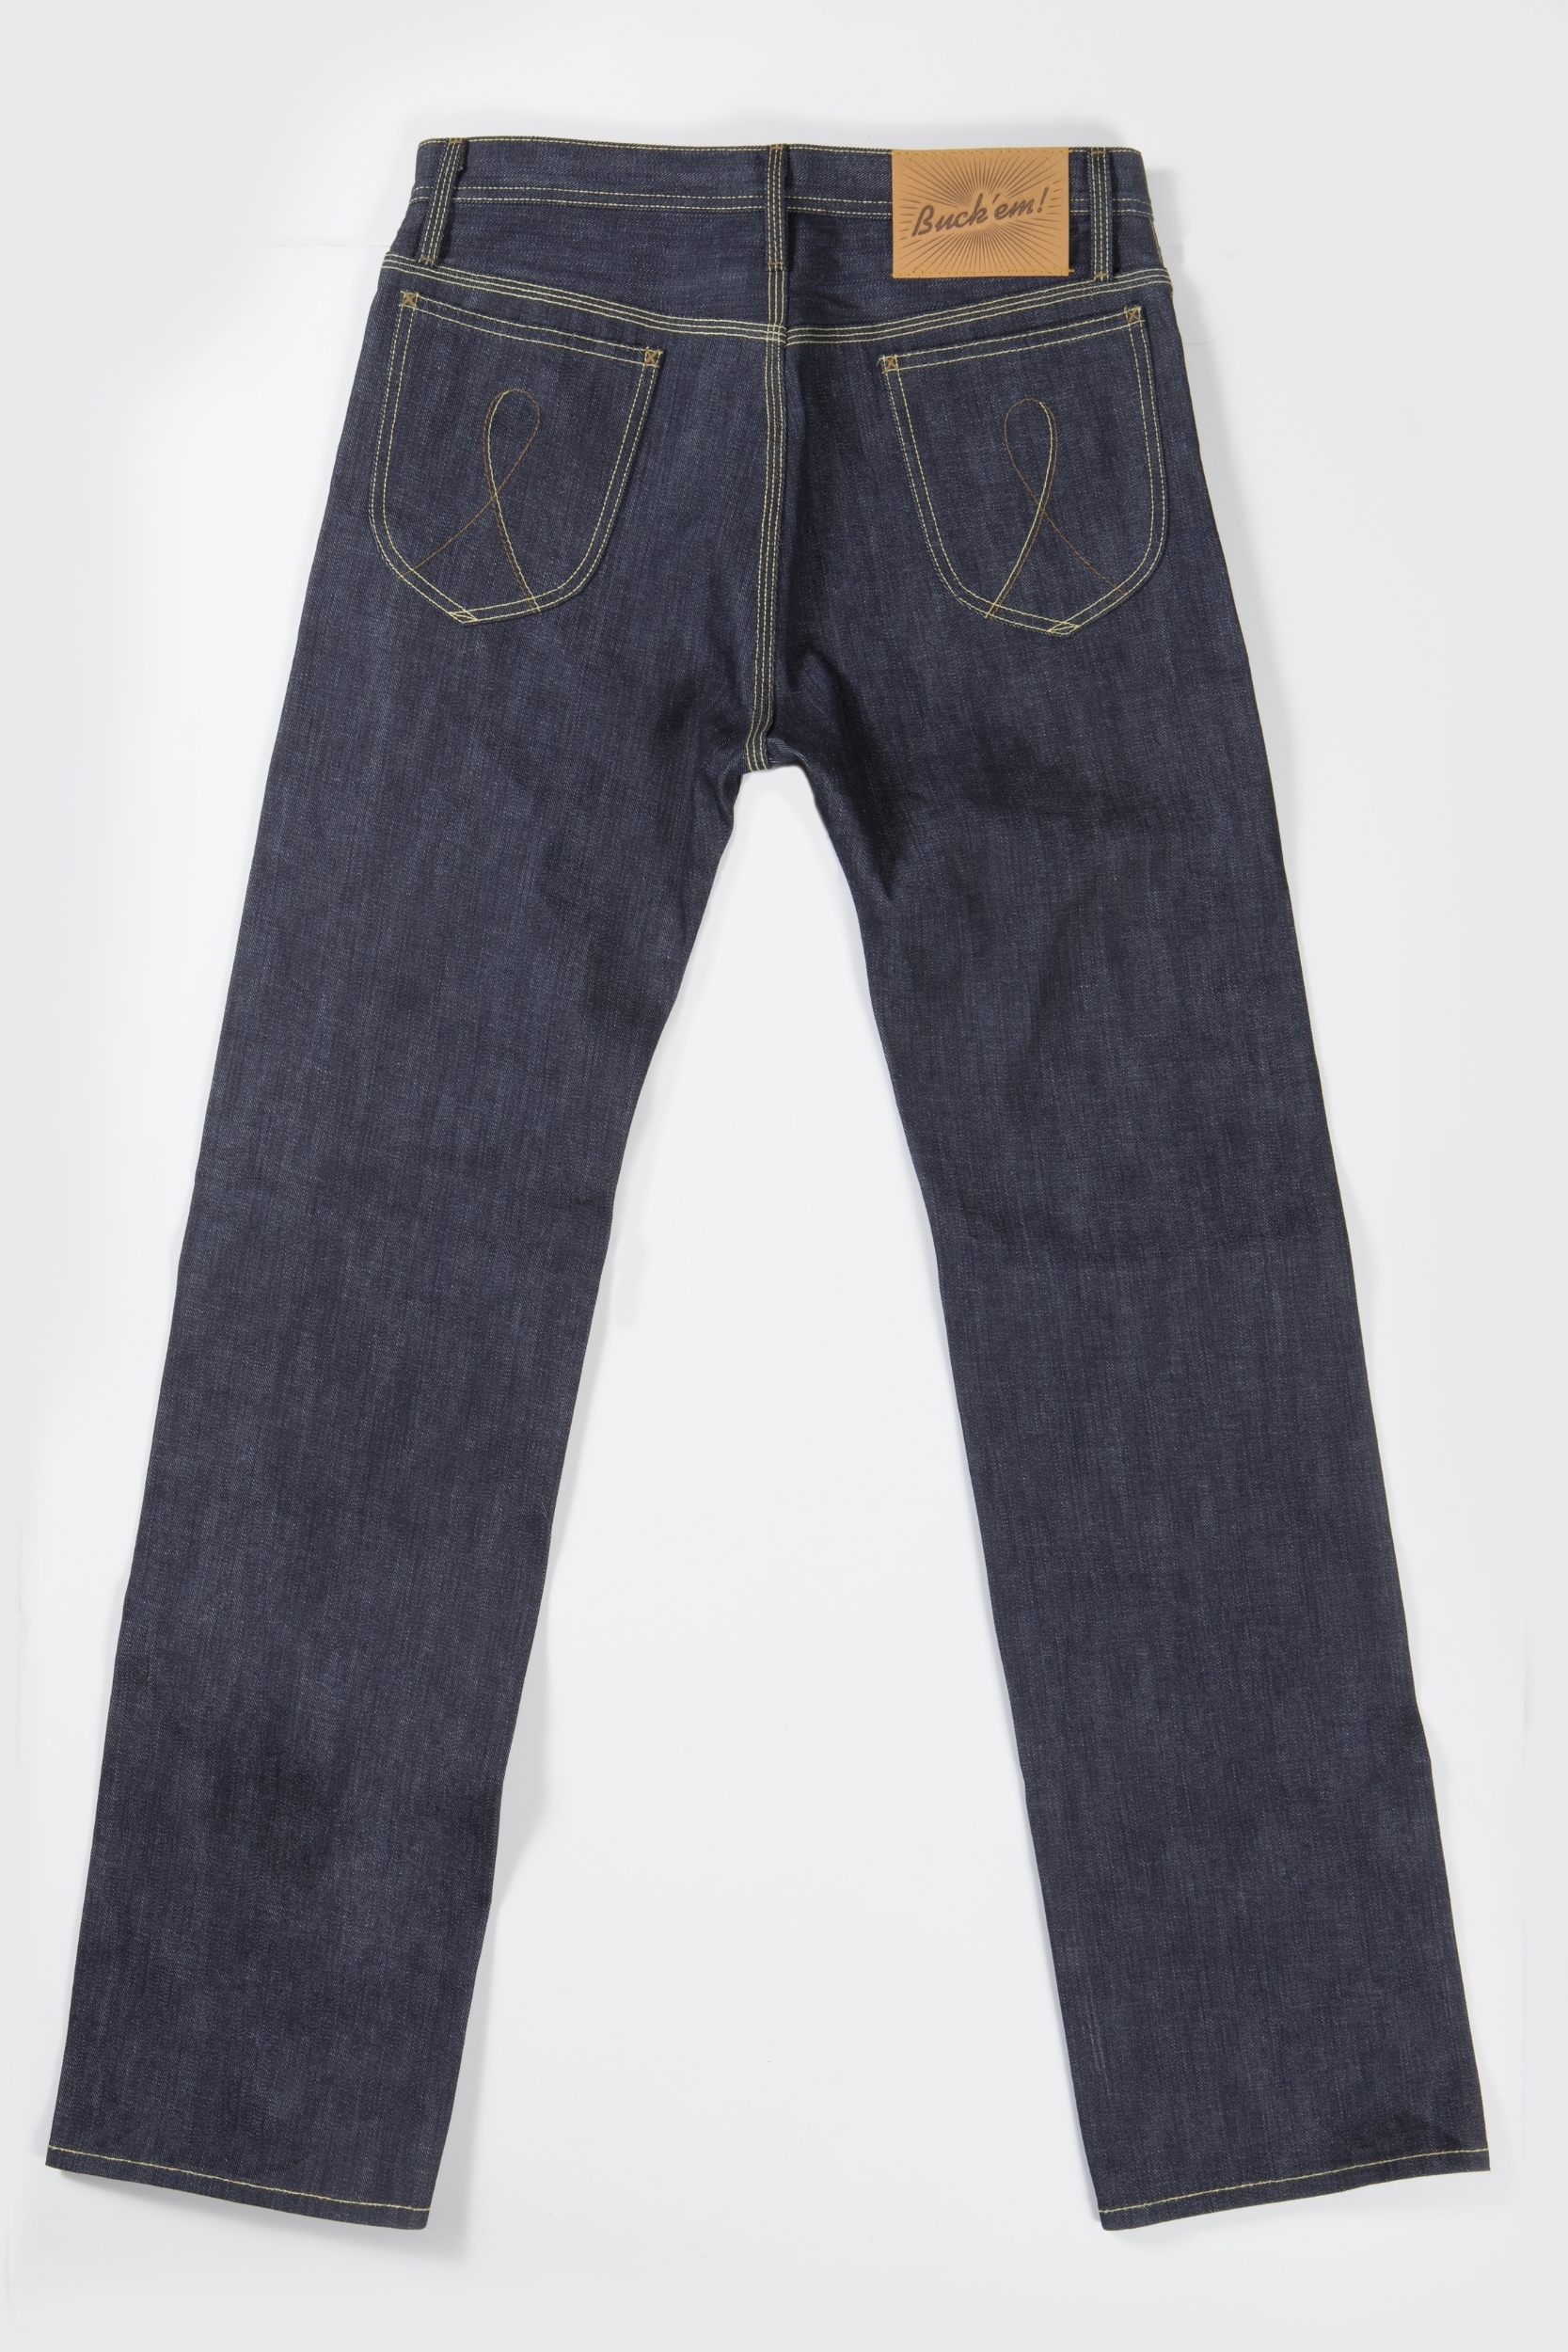 R1901 Ryder — W.H. Ranch Dungarees